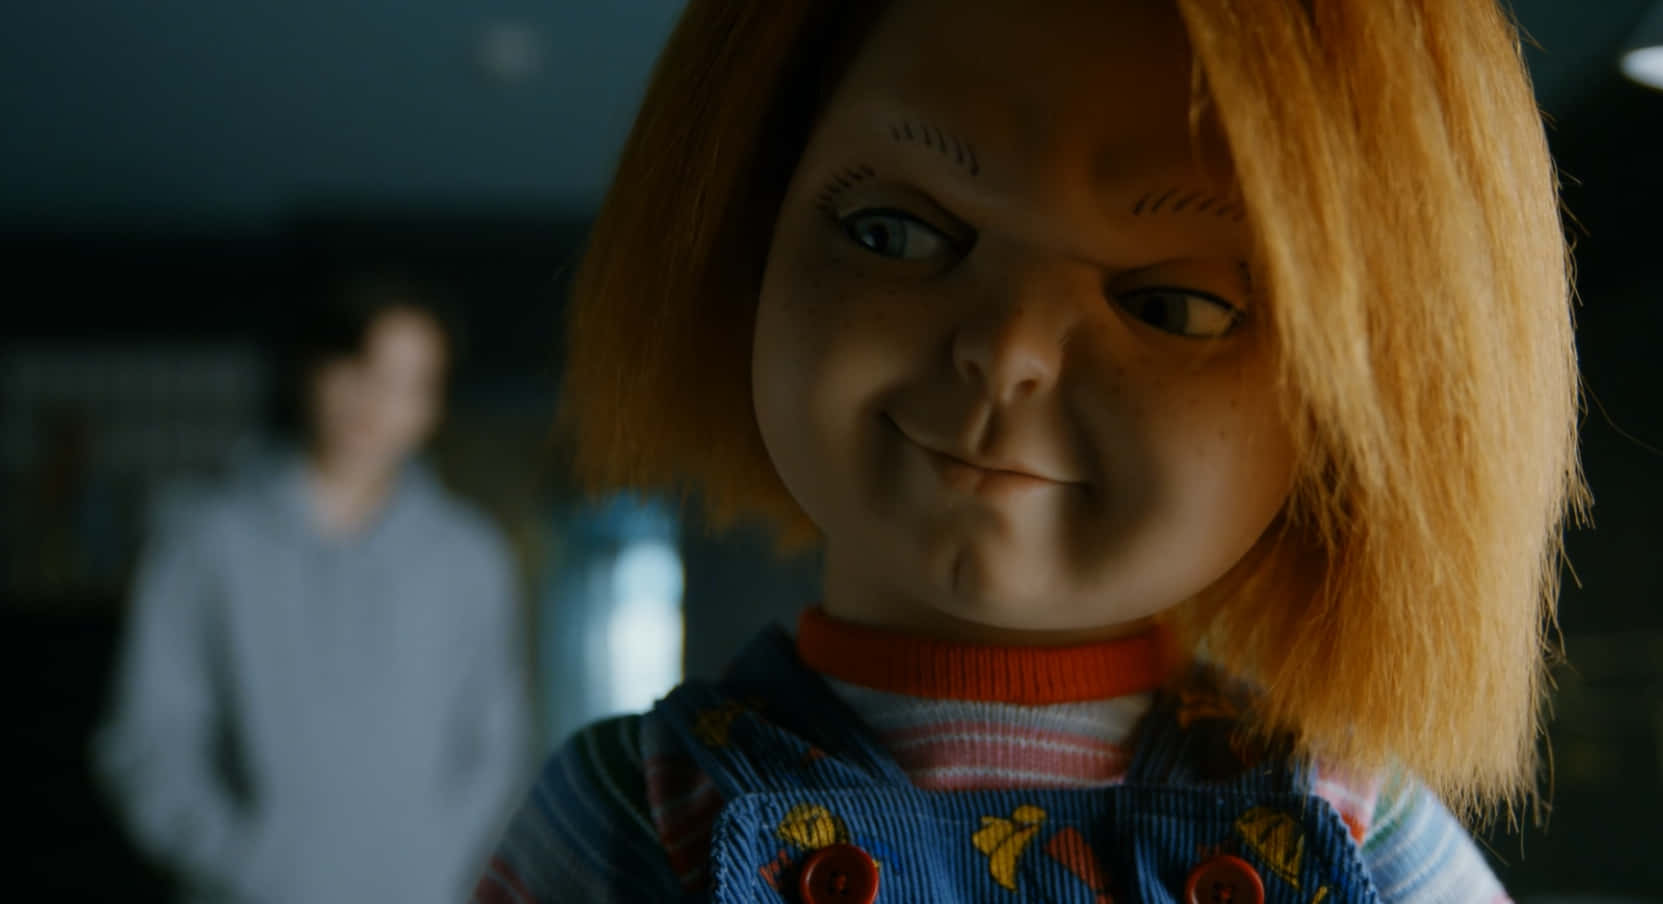 Menacing Gaze Of Chucky - The Most Infamous Haunted Doll